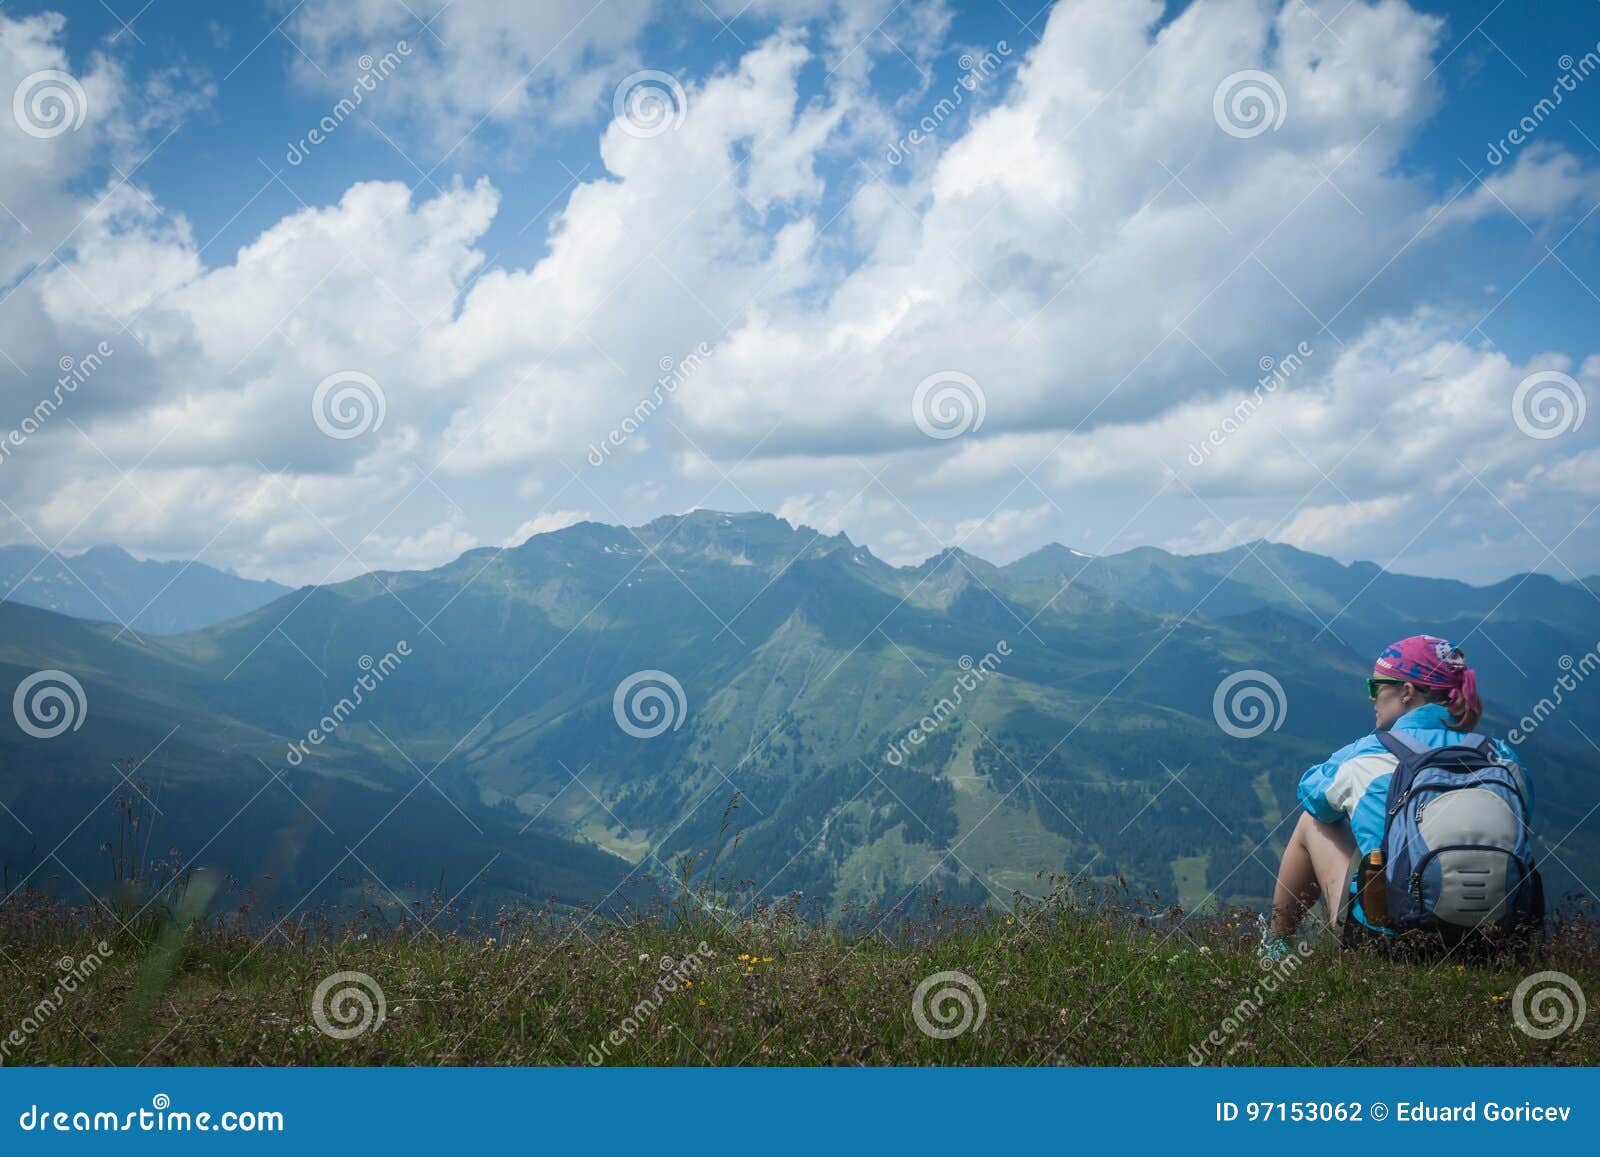 young woman resting on a mountain hike